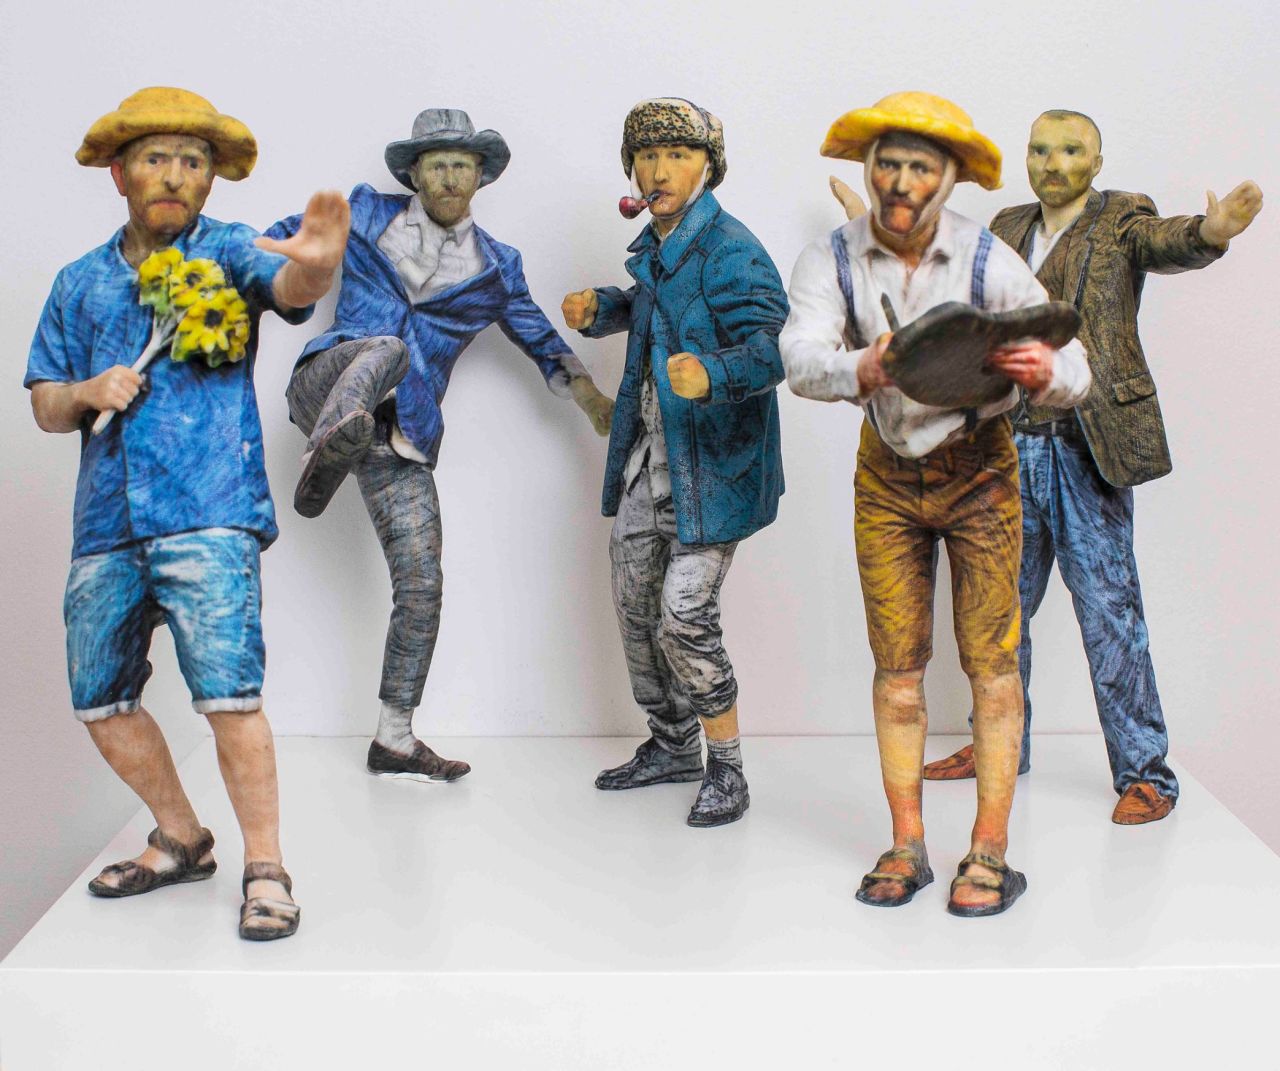 Daniel Warnecke has taken Van Gogh's renown self-portraits one step further and created 3D printed figurines of the 19th century artist.  